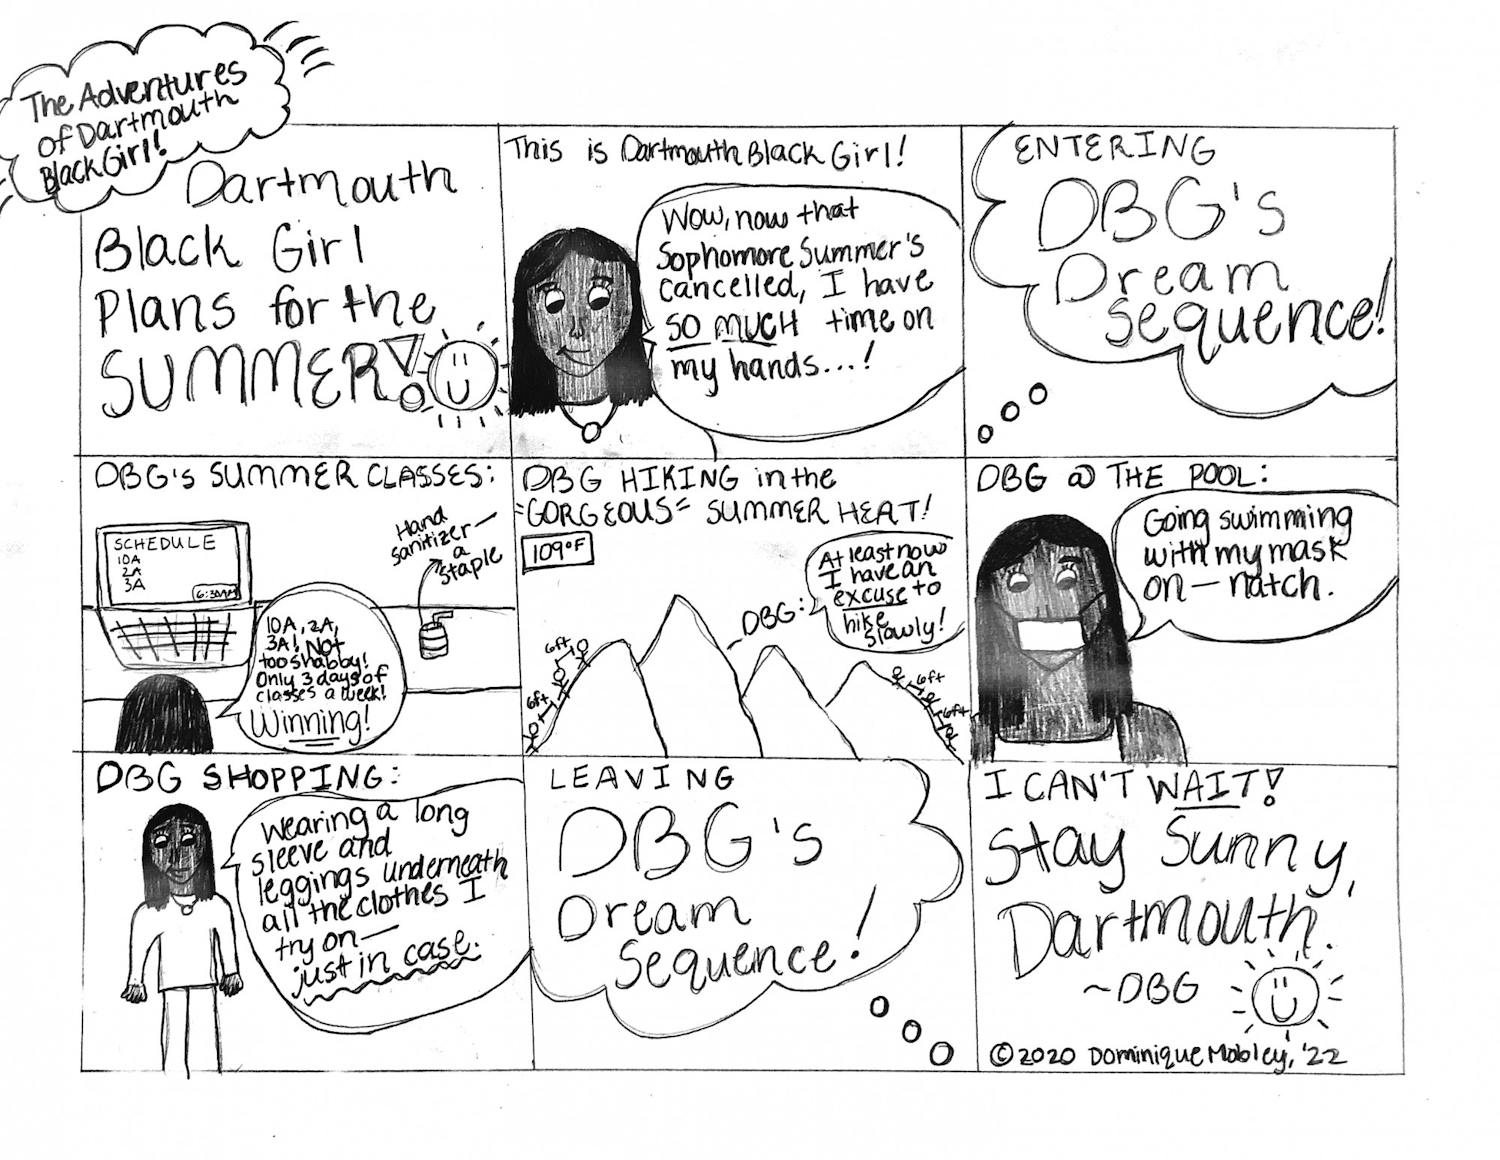 Dominique Mobley Cartoon to Be Published 5_15.jpg